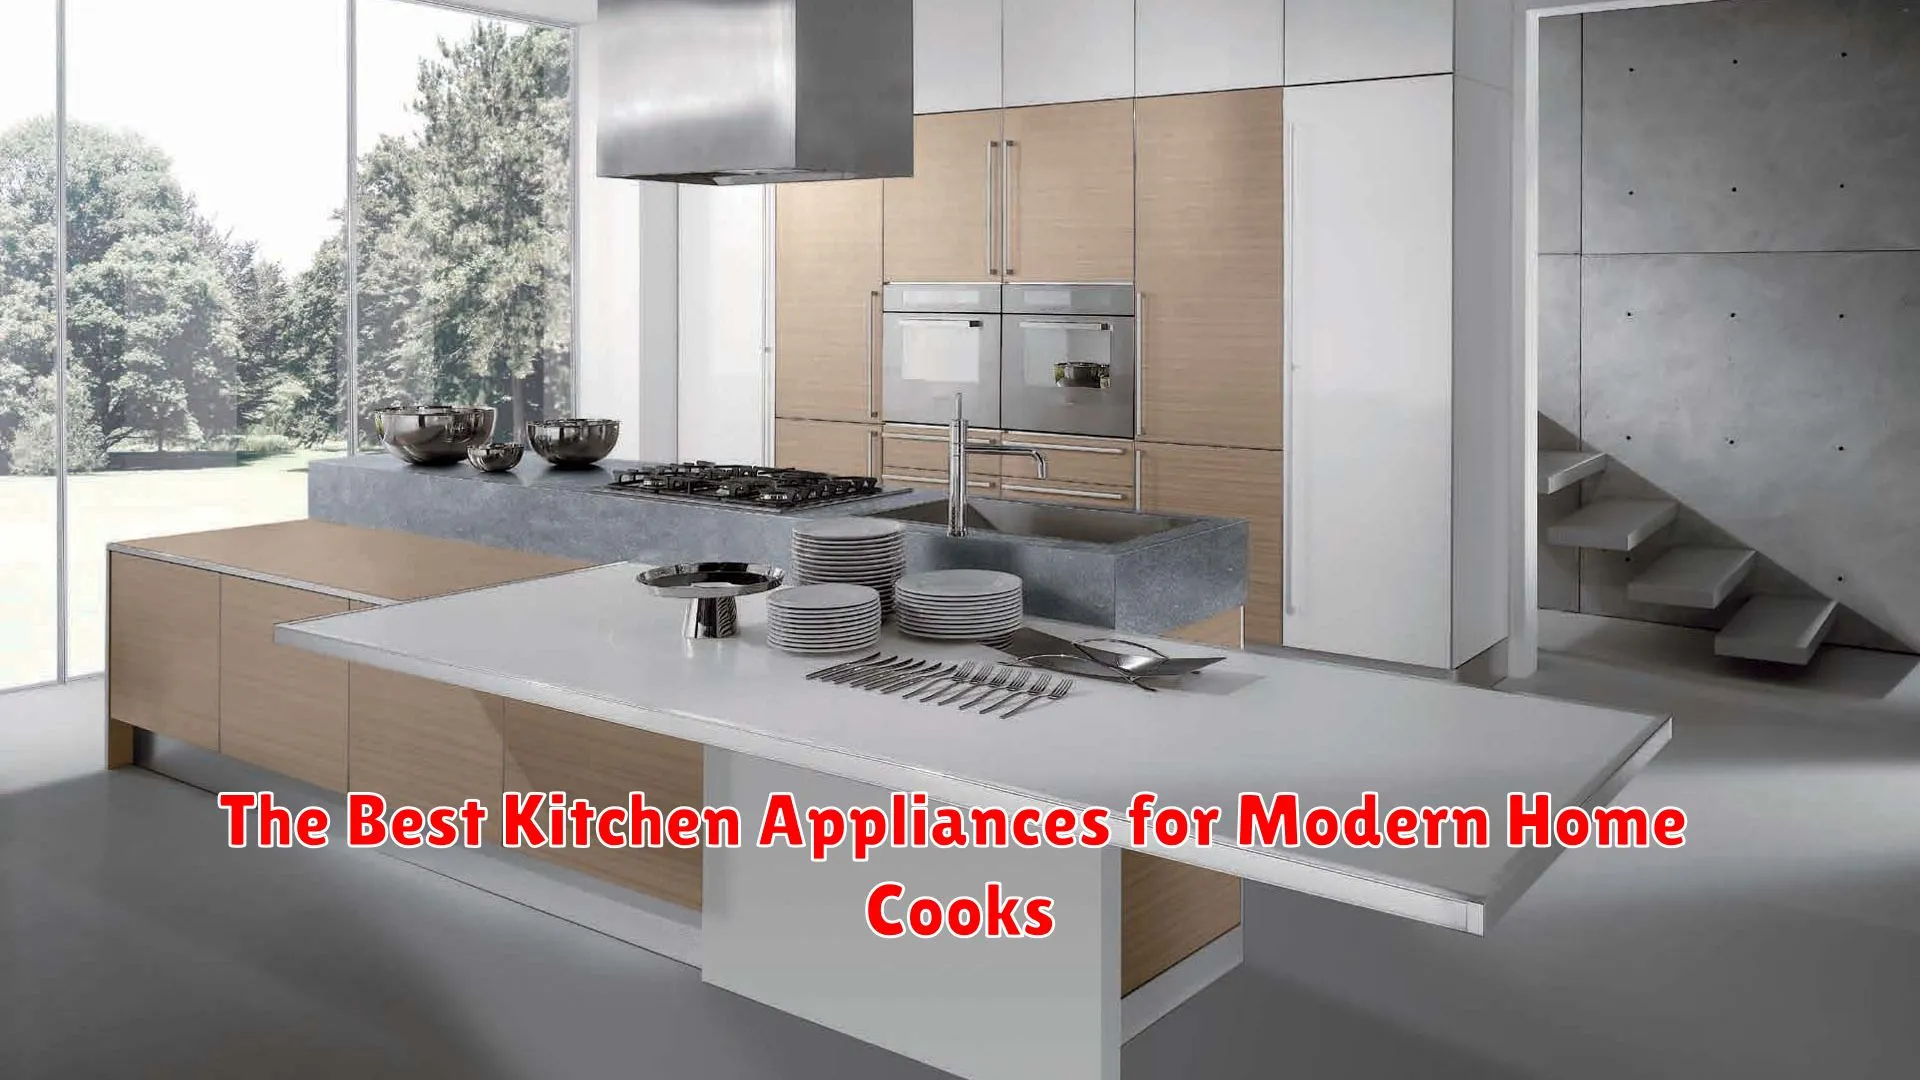 The Best Kitchen Appliances for Modern Home Cooks